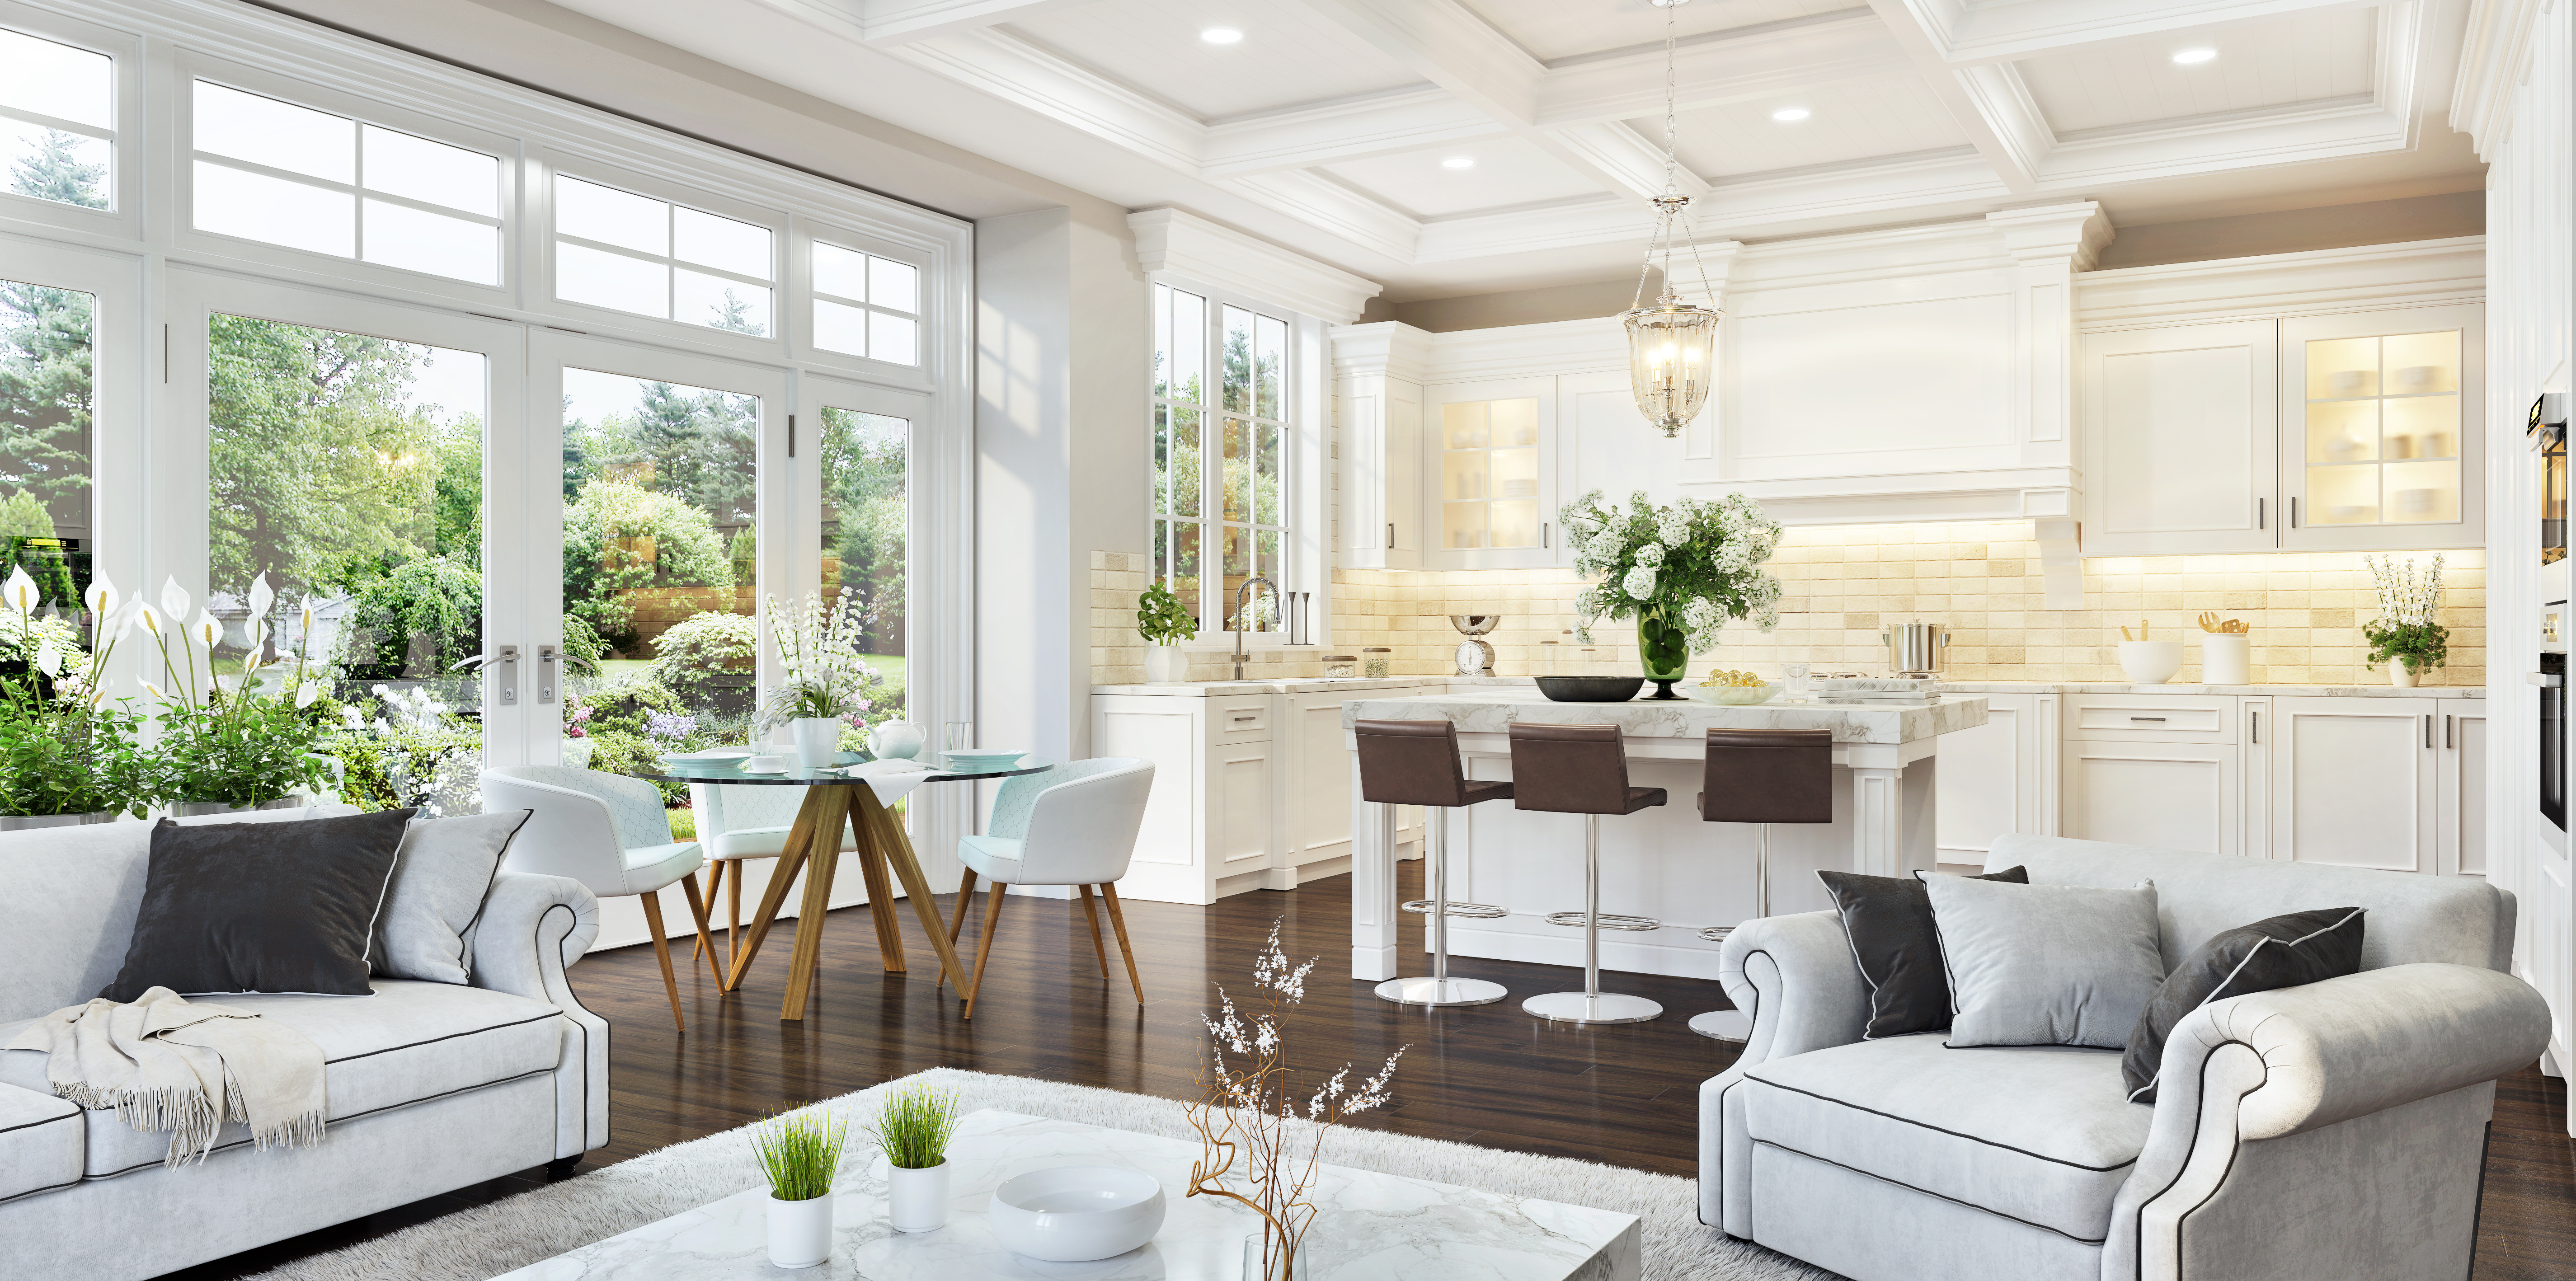 luxurious white living room kitchen in mansion home